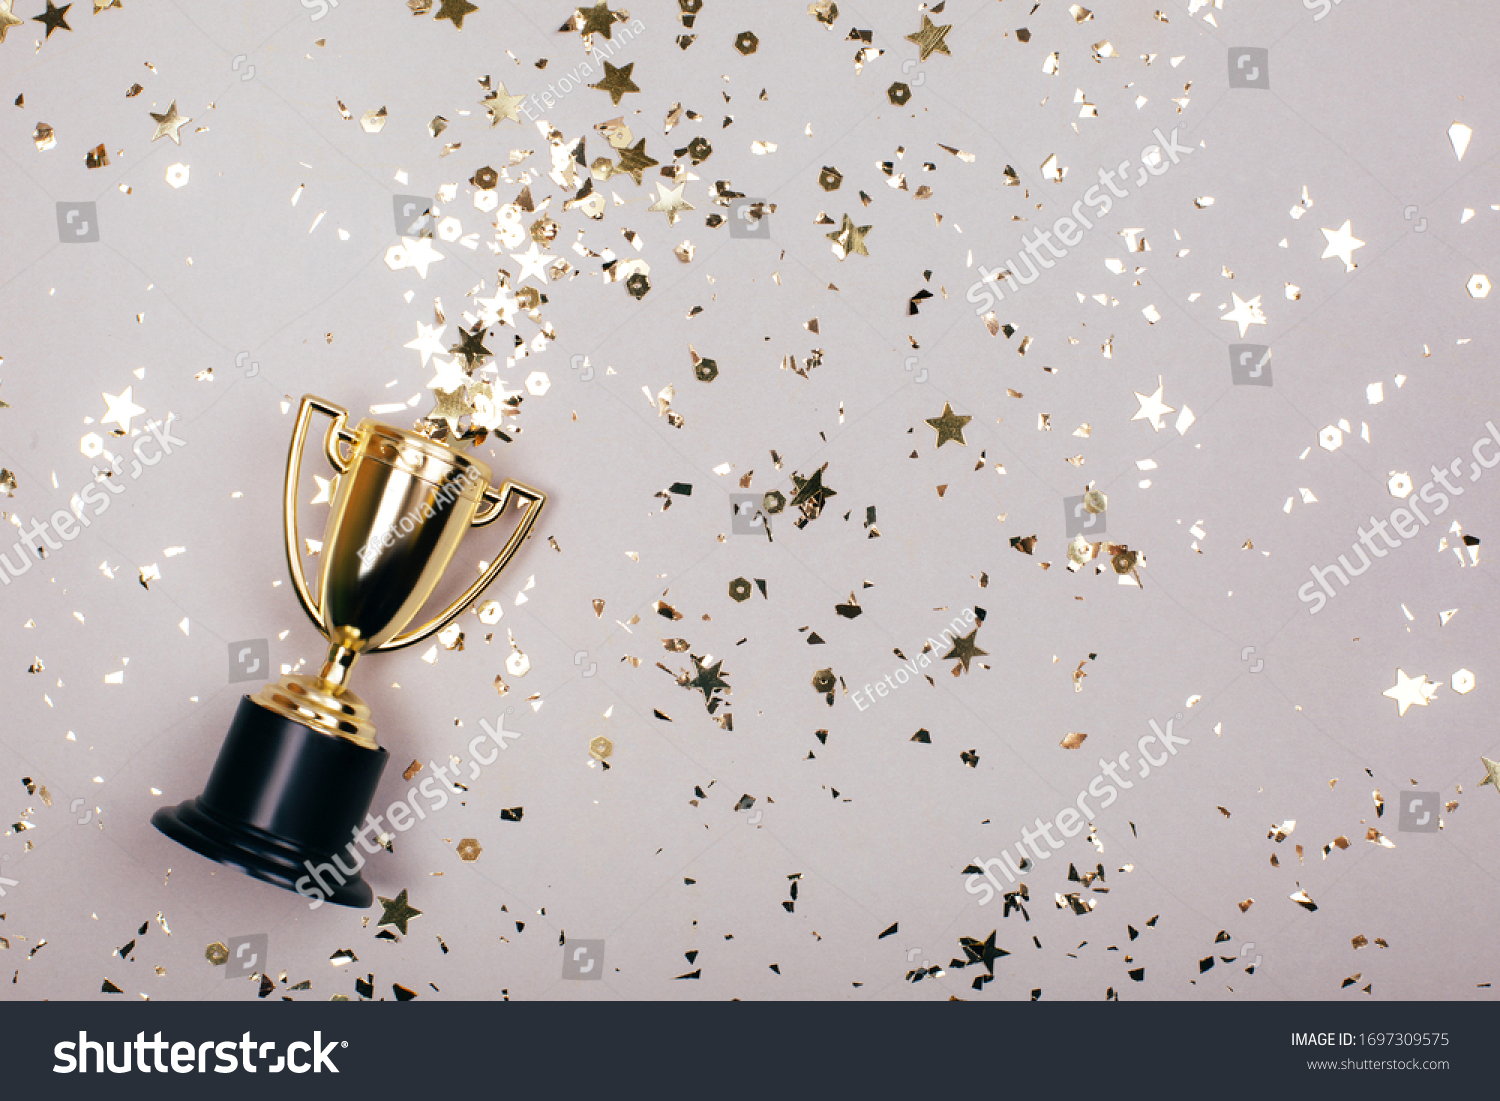 Sparkles grey background with a winners cup. Flat lay style. #1697309575